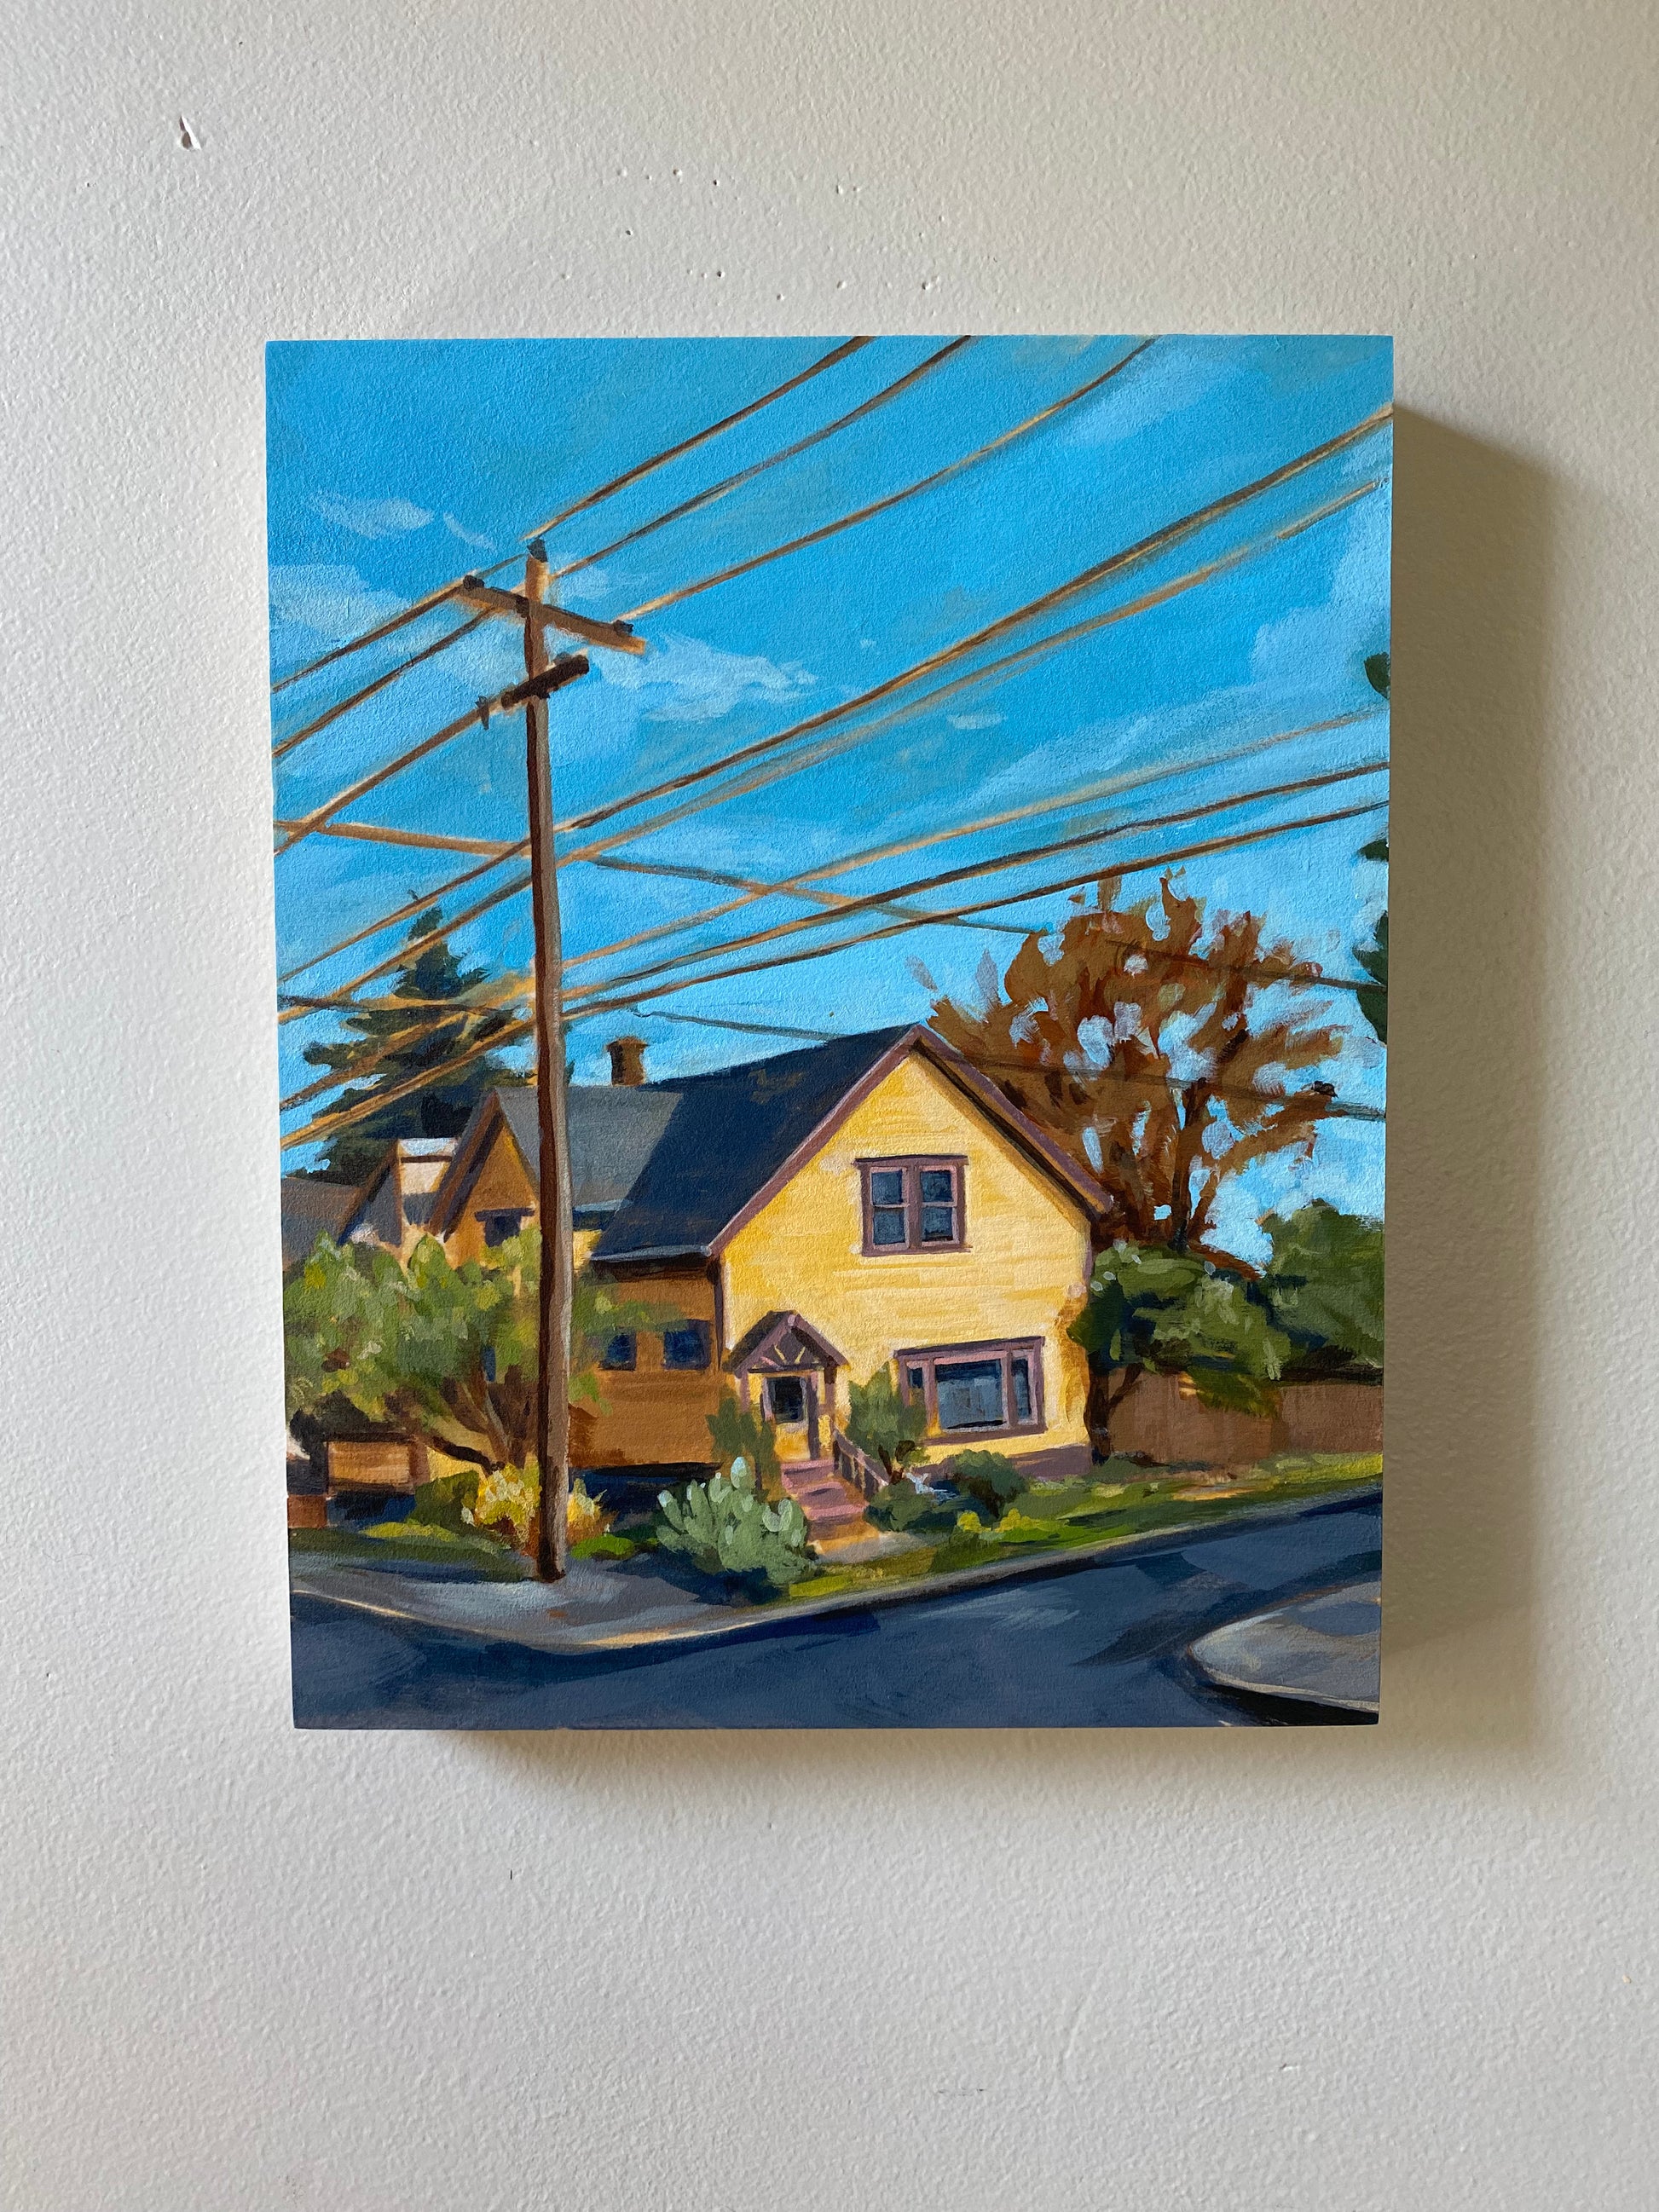 Unframed 8x10 painting of a yellow house in a Portland neighborhood